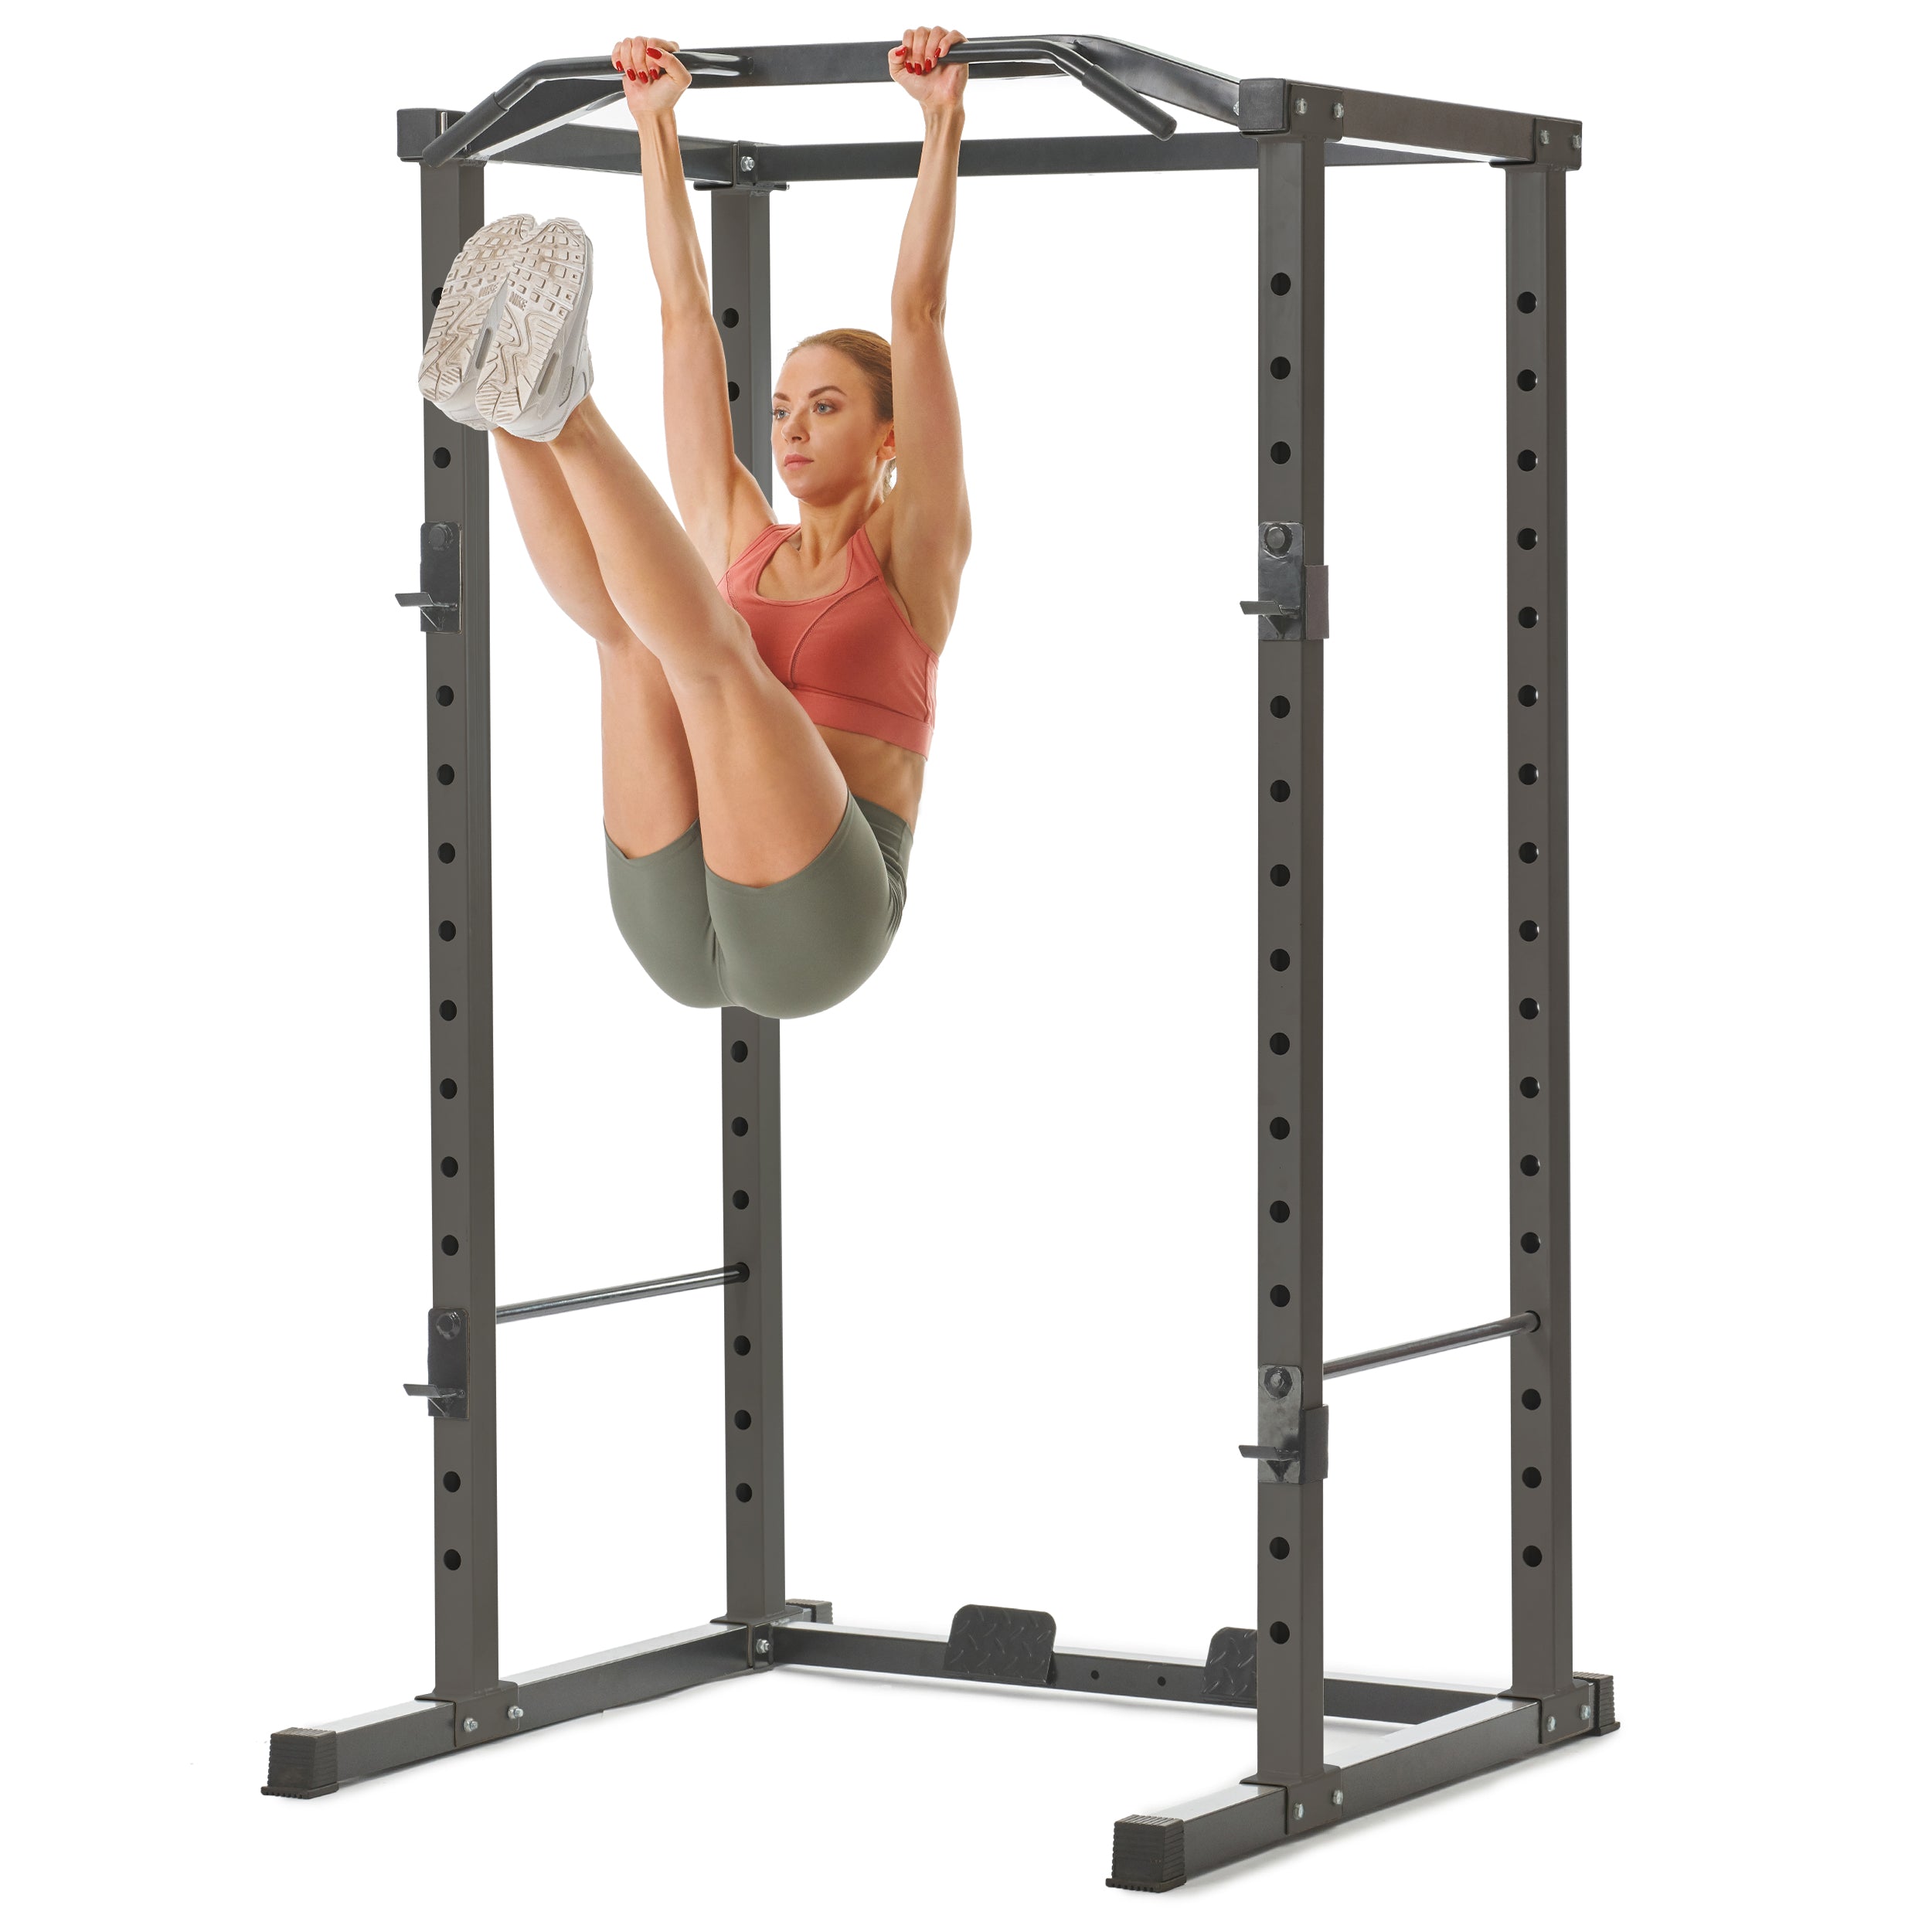 utilsigtet hektar binding PRCTZ Adjustable Power Cage, 1000 lb. Capacity, Weight Lift Cage with